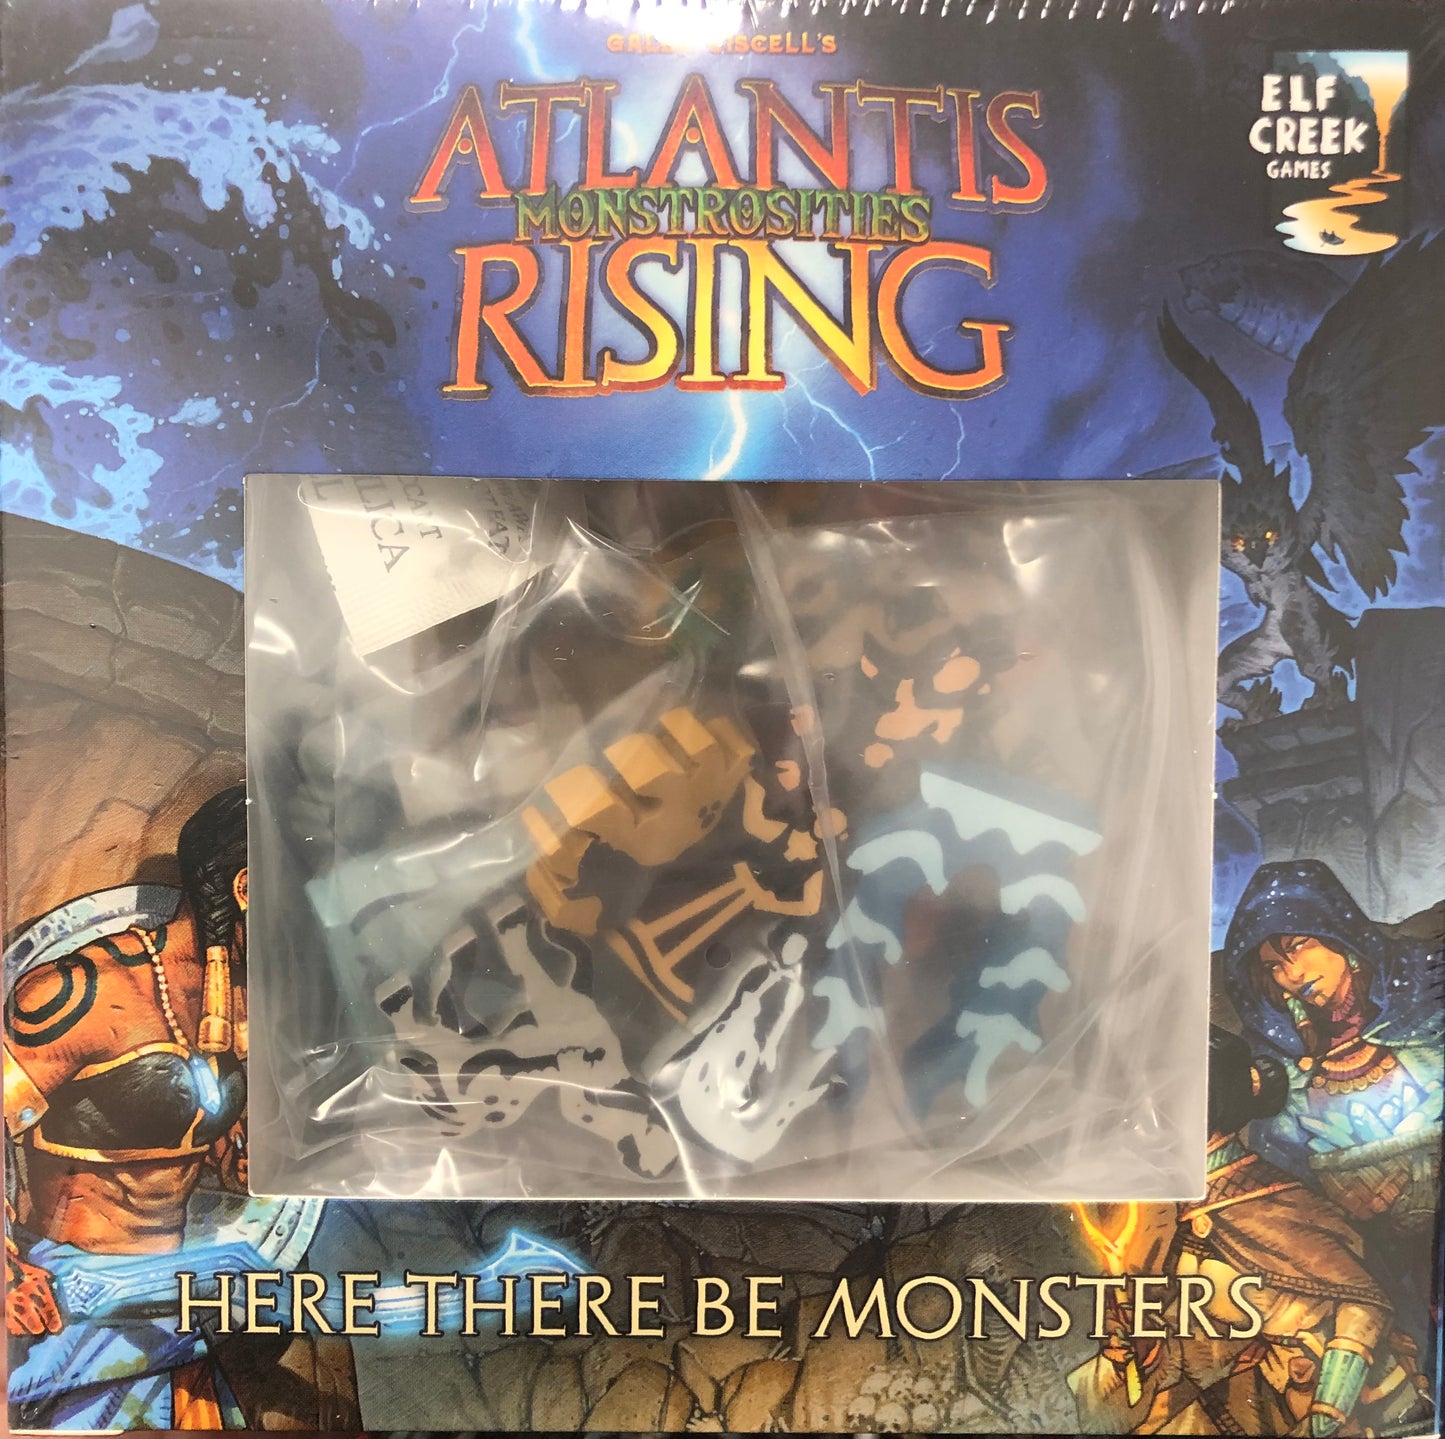 ATLANTIS RISING HERE THERE BE MONSTERS